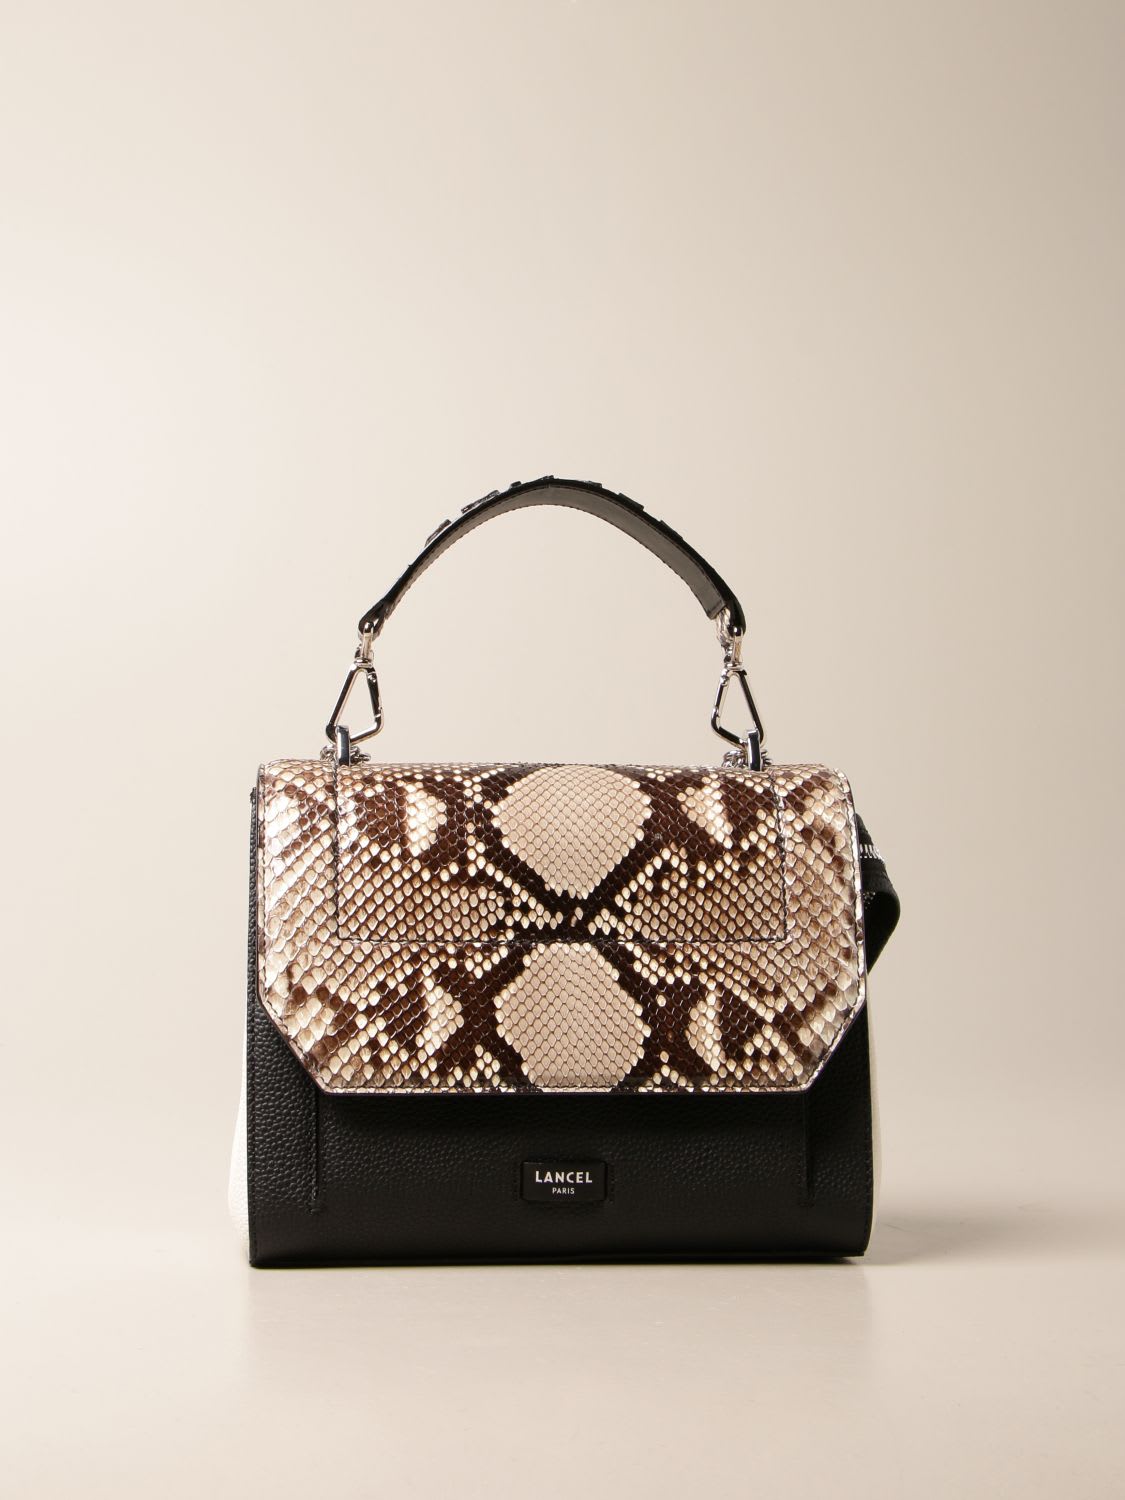 Lancel Bag In Hammered Leather And Python Leather In Grey